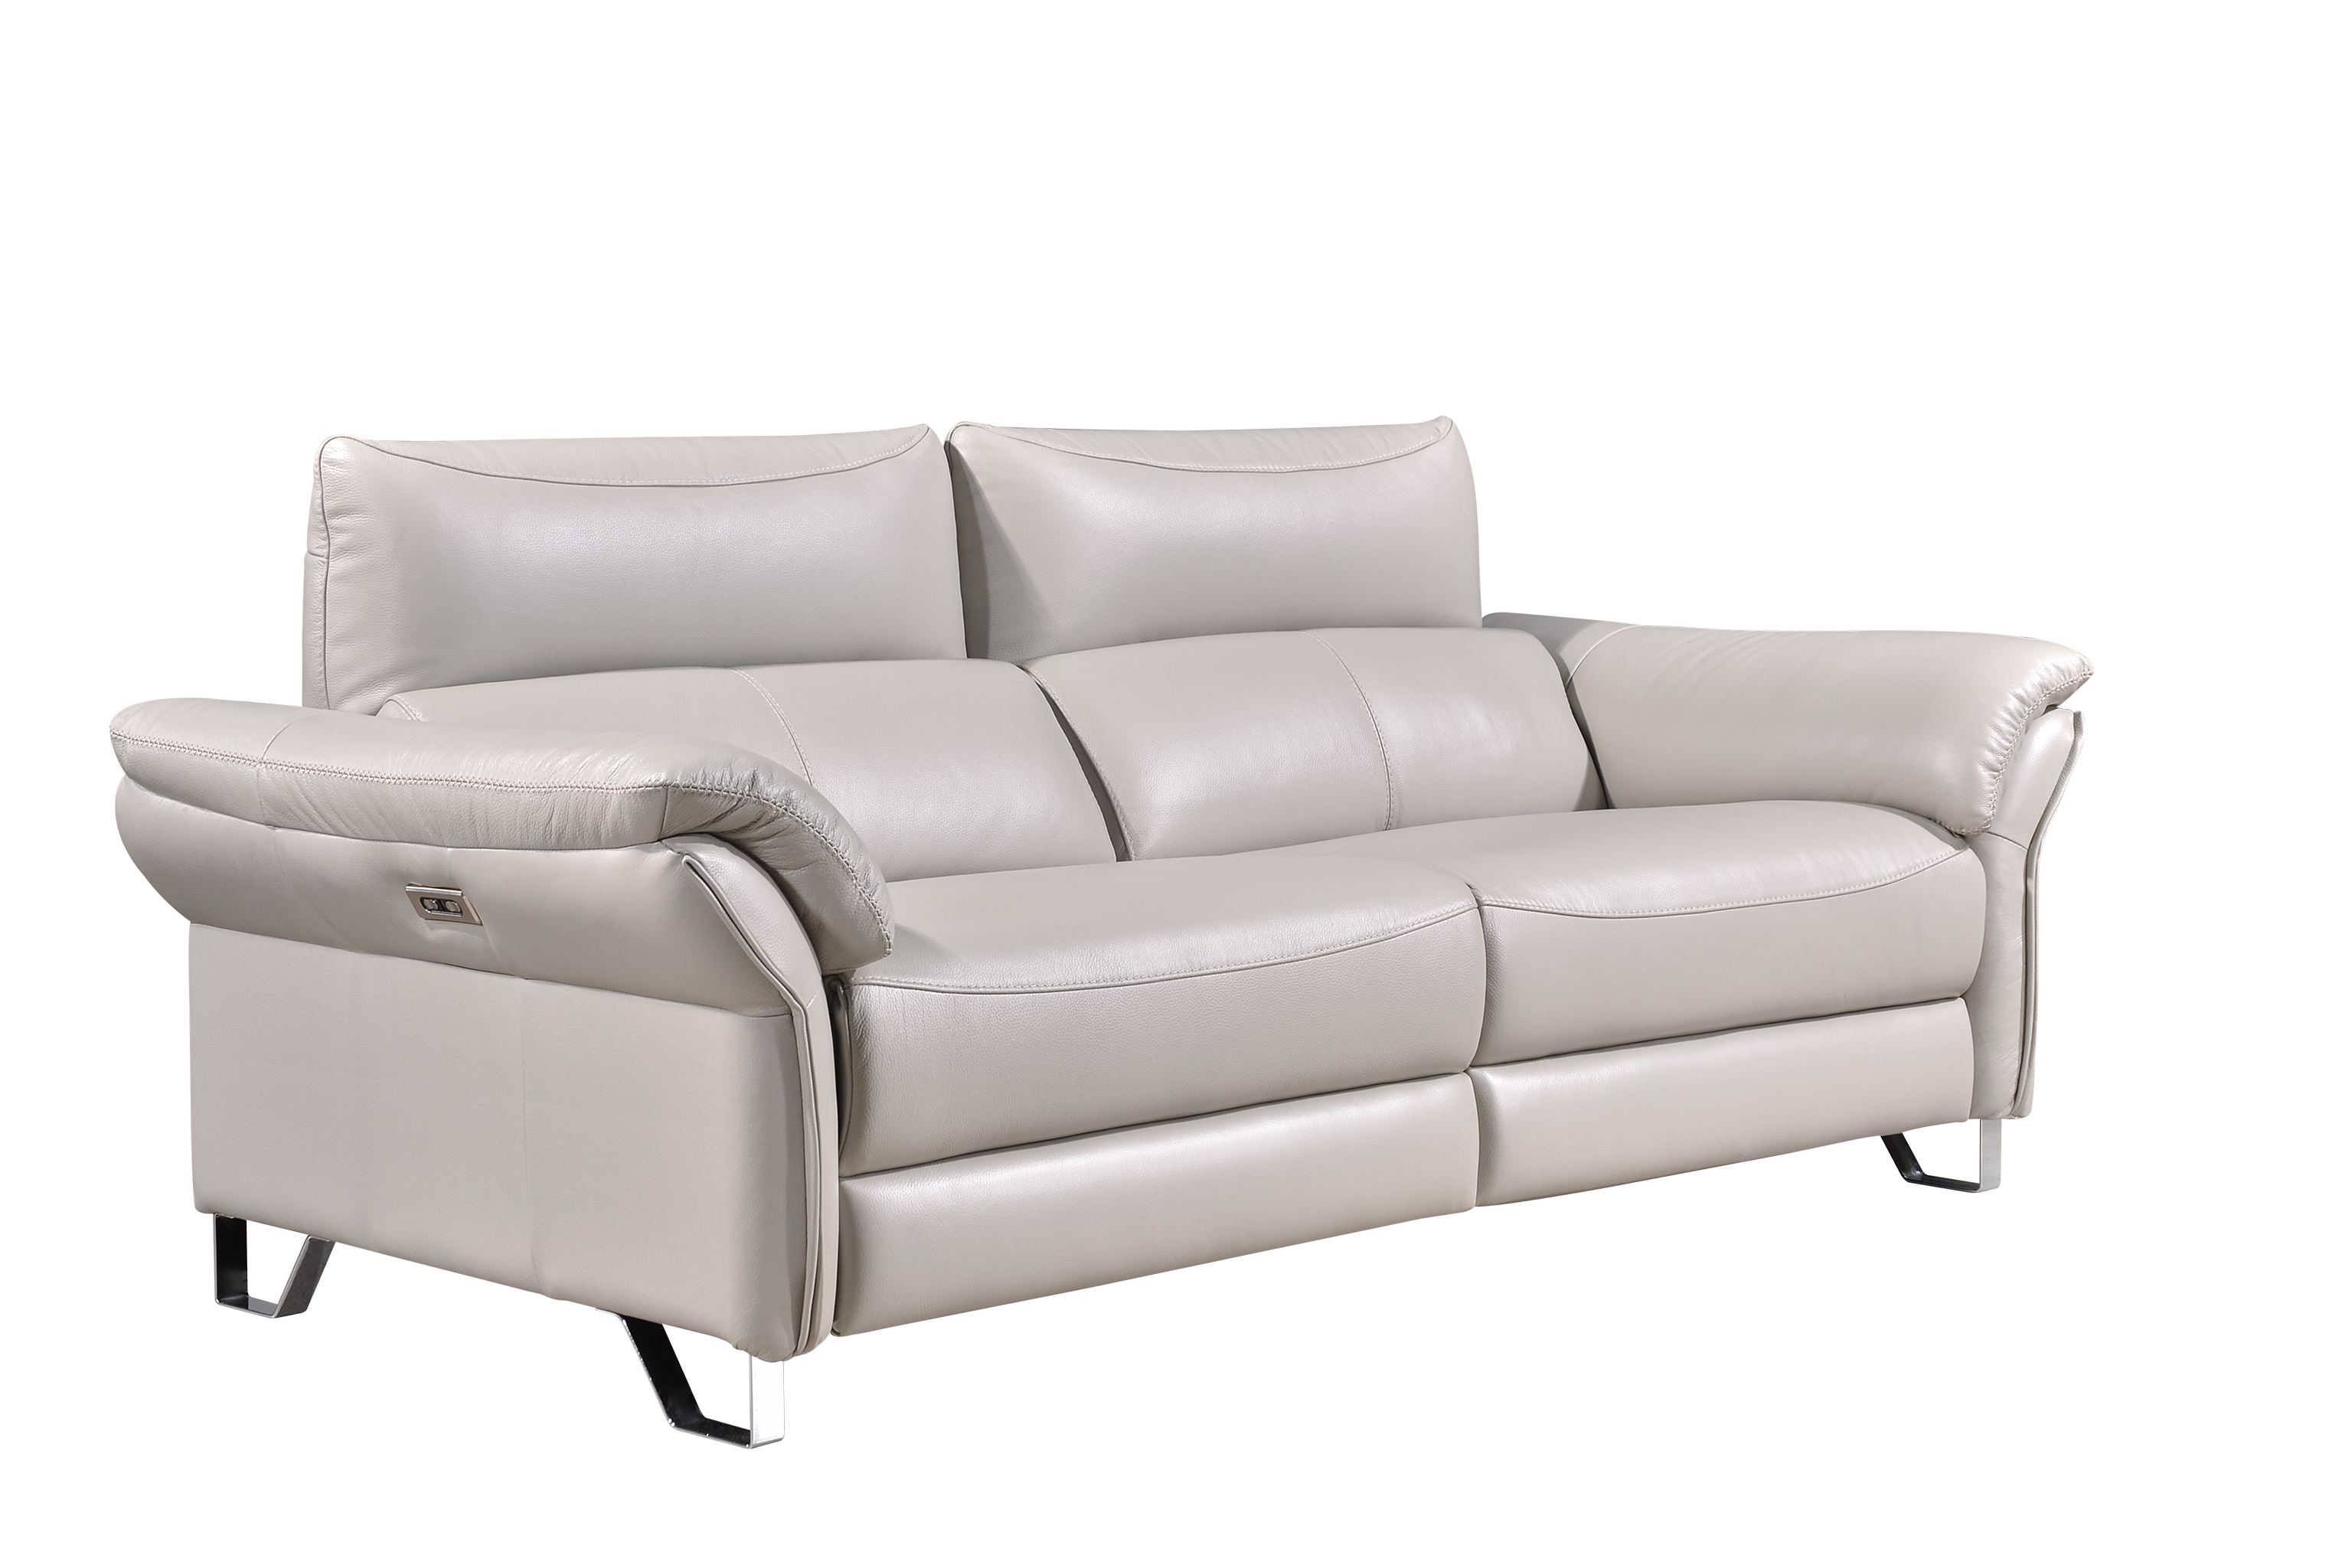 TOMAS 2.5 Seater Recliner Sofa in Leather by Castilla